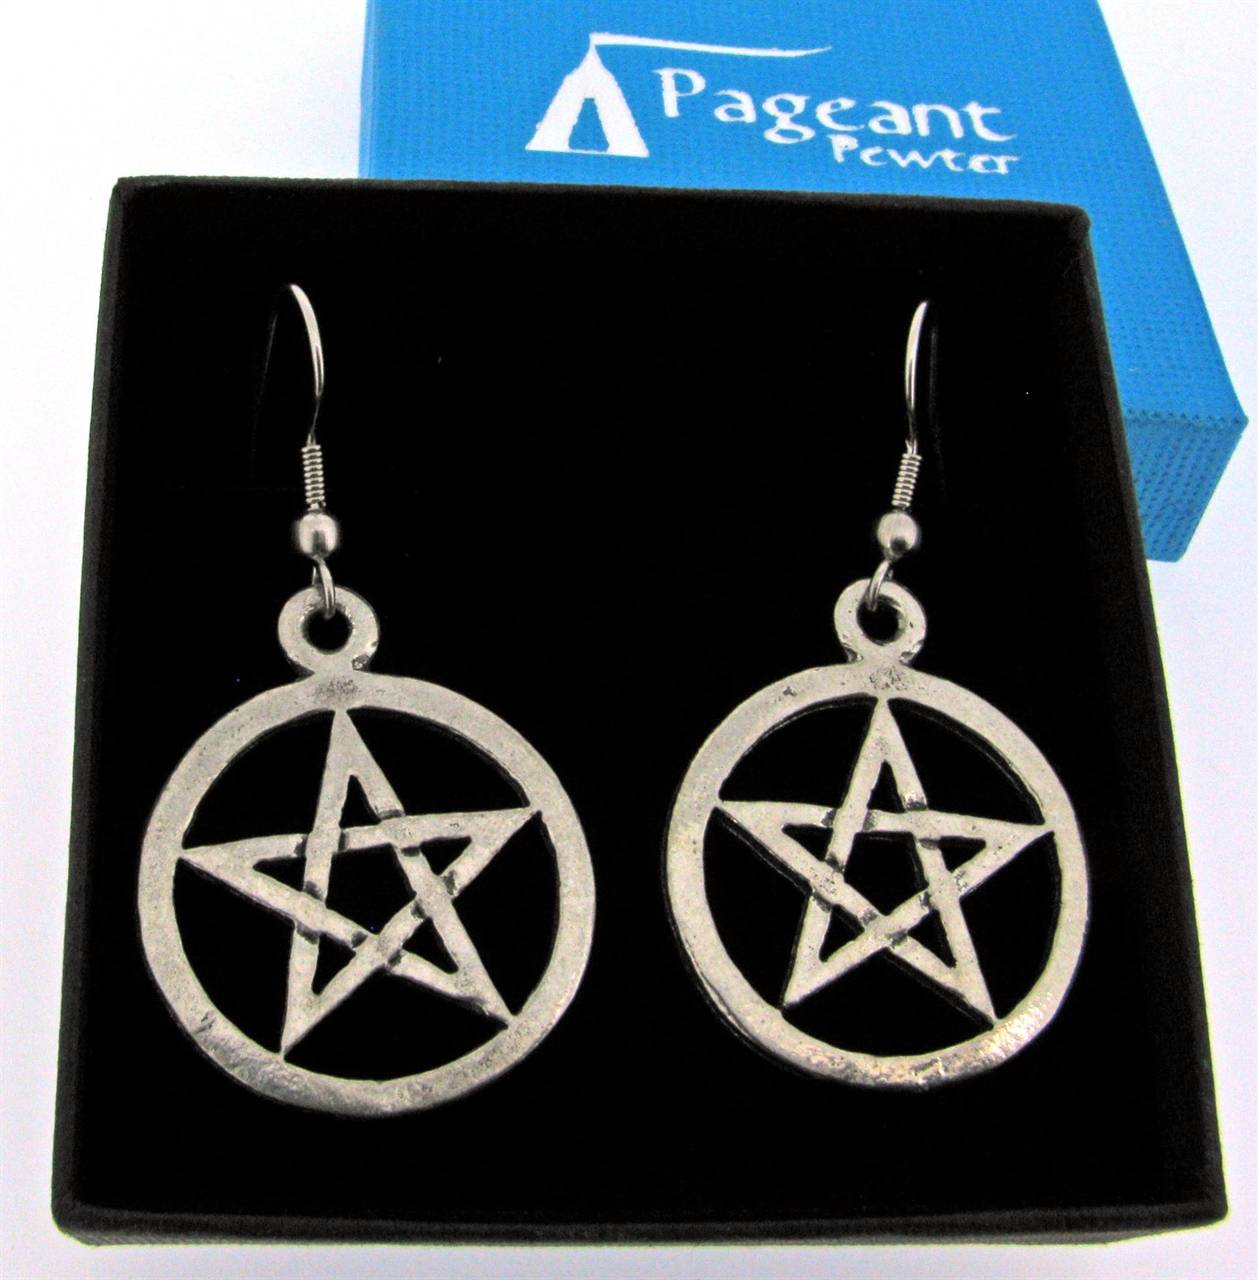 Open Pentangle Earrings - high quality pewter gifts from Pageant Pewter